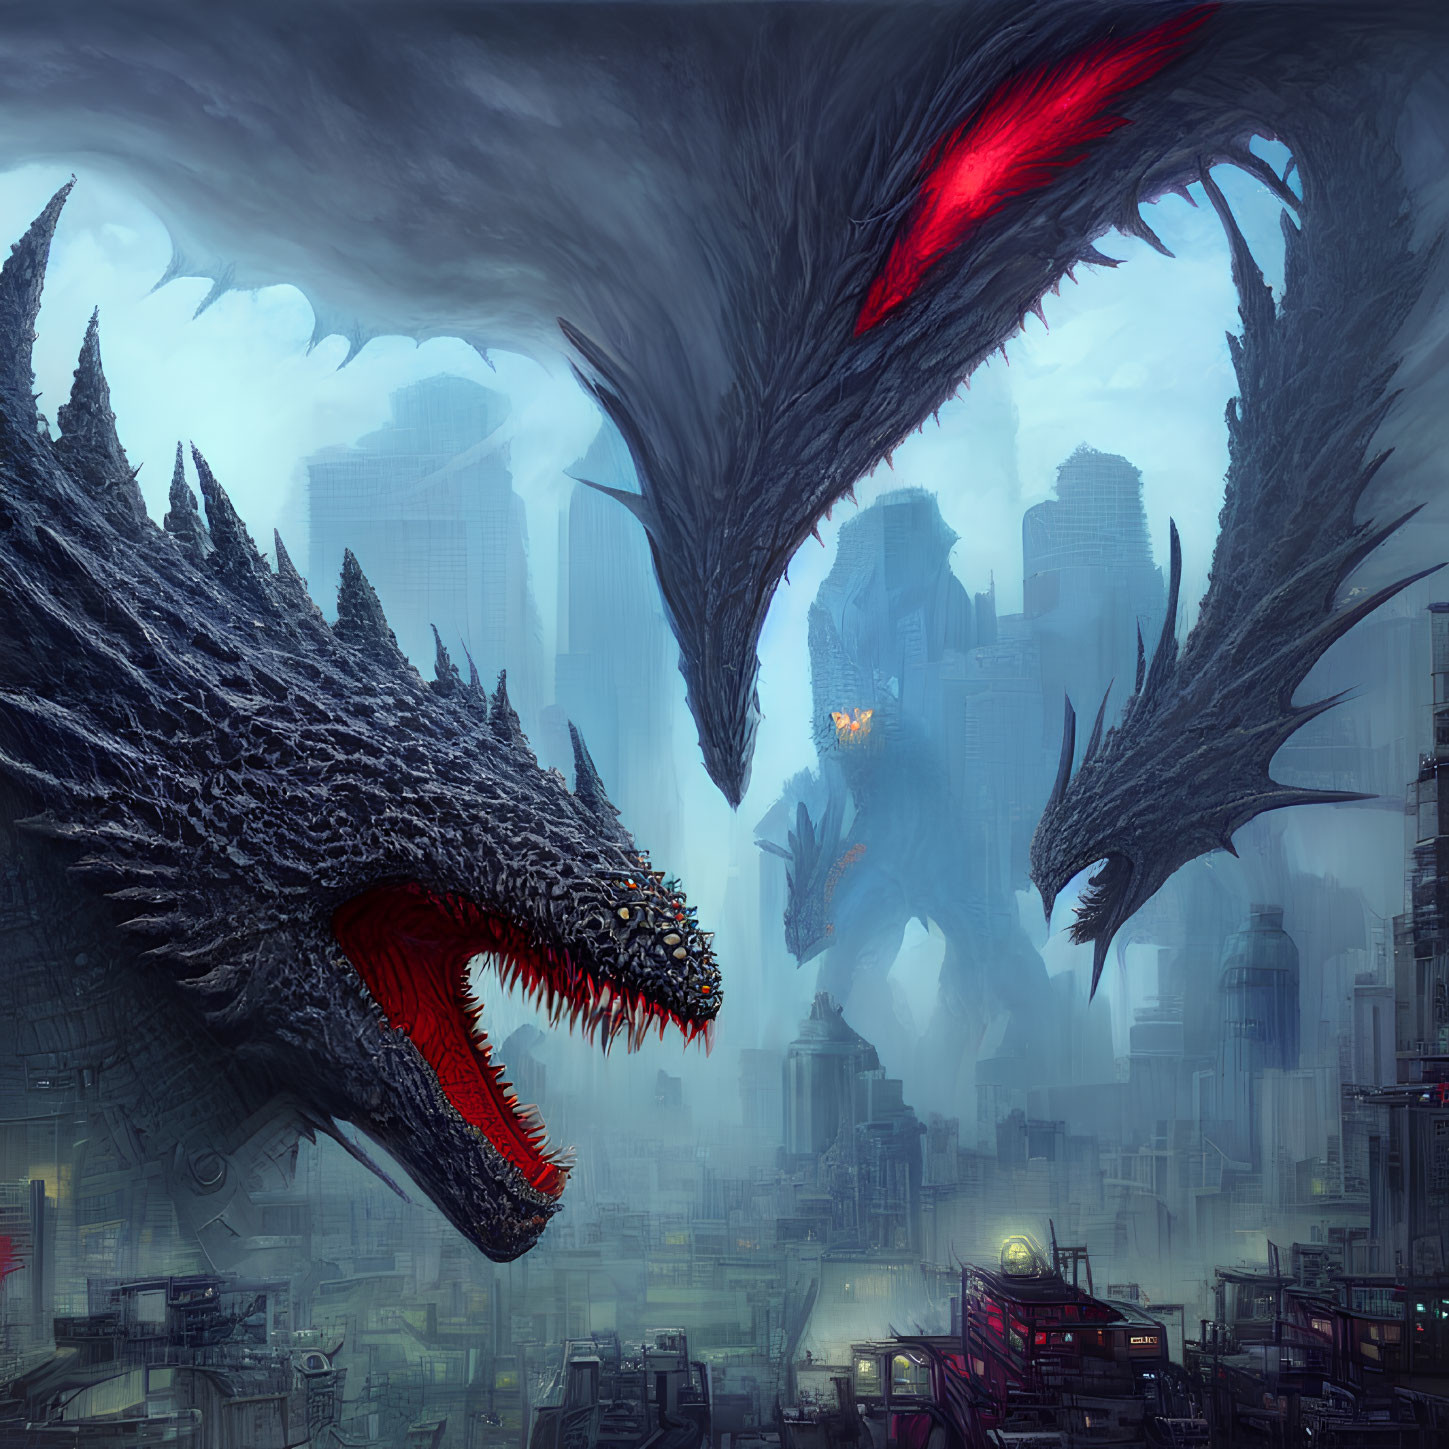 Gigantic dragon overlooking futuristic cityscape with stormy sky